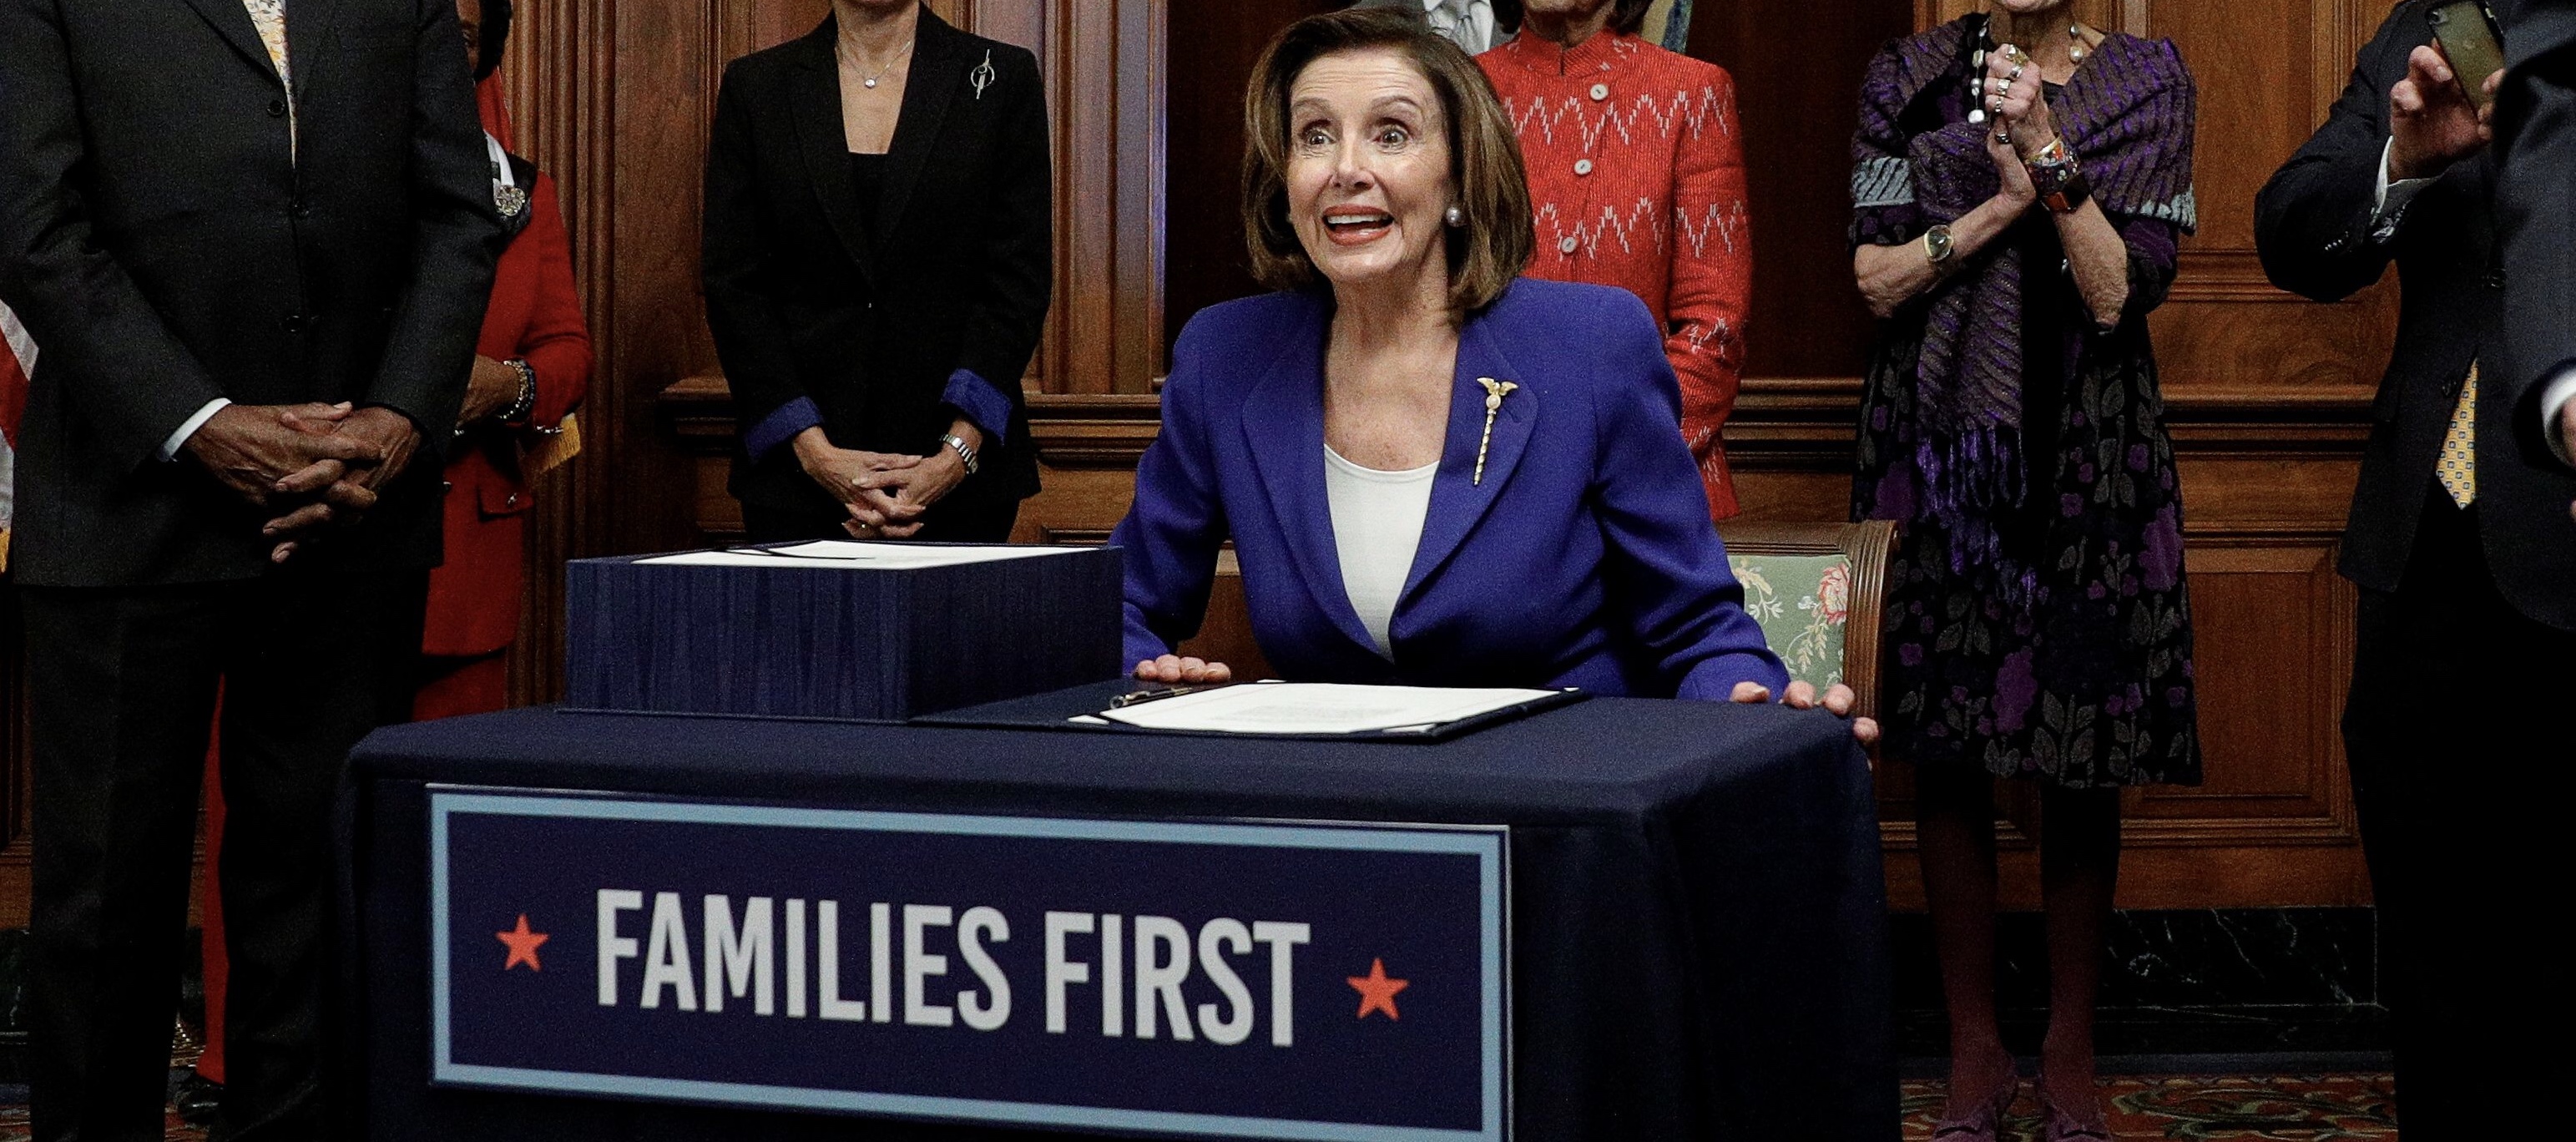 U.S. House Speaker Nancy Pelosi (D-CA) is applauded during a signing ceremony after the House of Representatives approved a $2.2 trillion coronavirus aid package at the U.S. Capitol in Washington, U.S., March 27, 2020. REUTERS/Tom Brenner